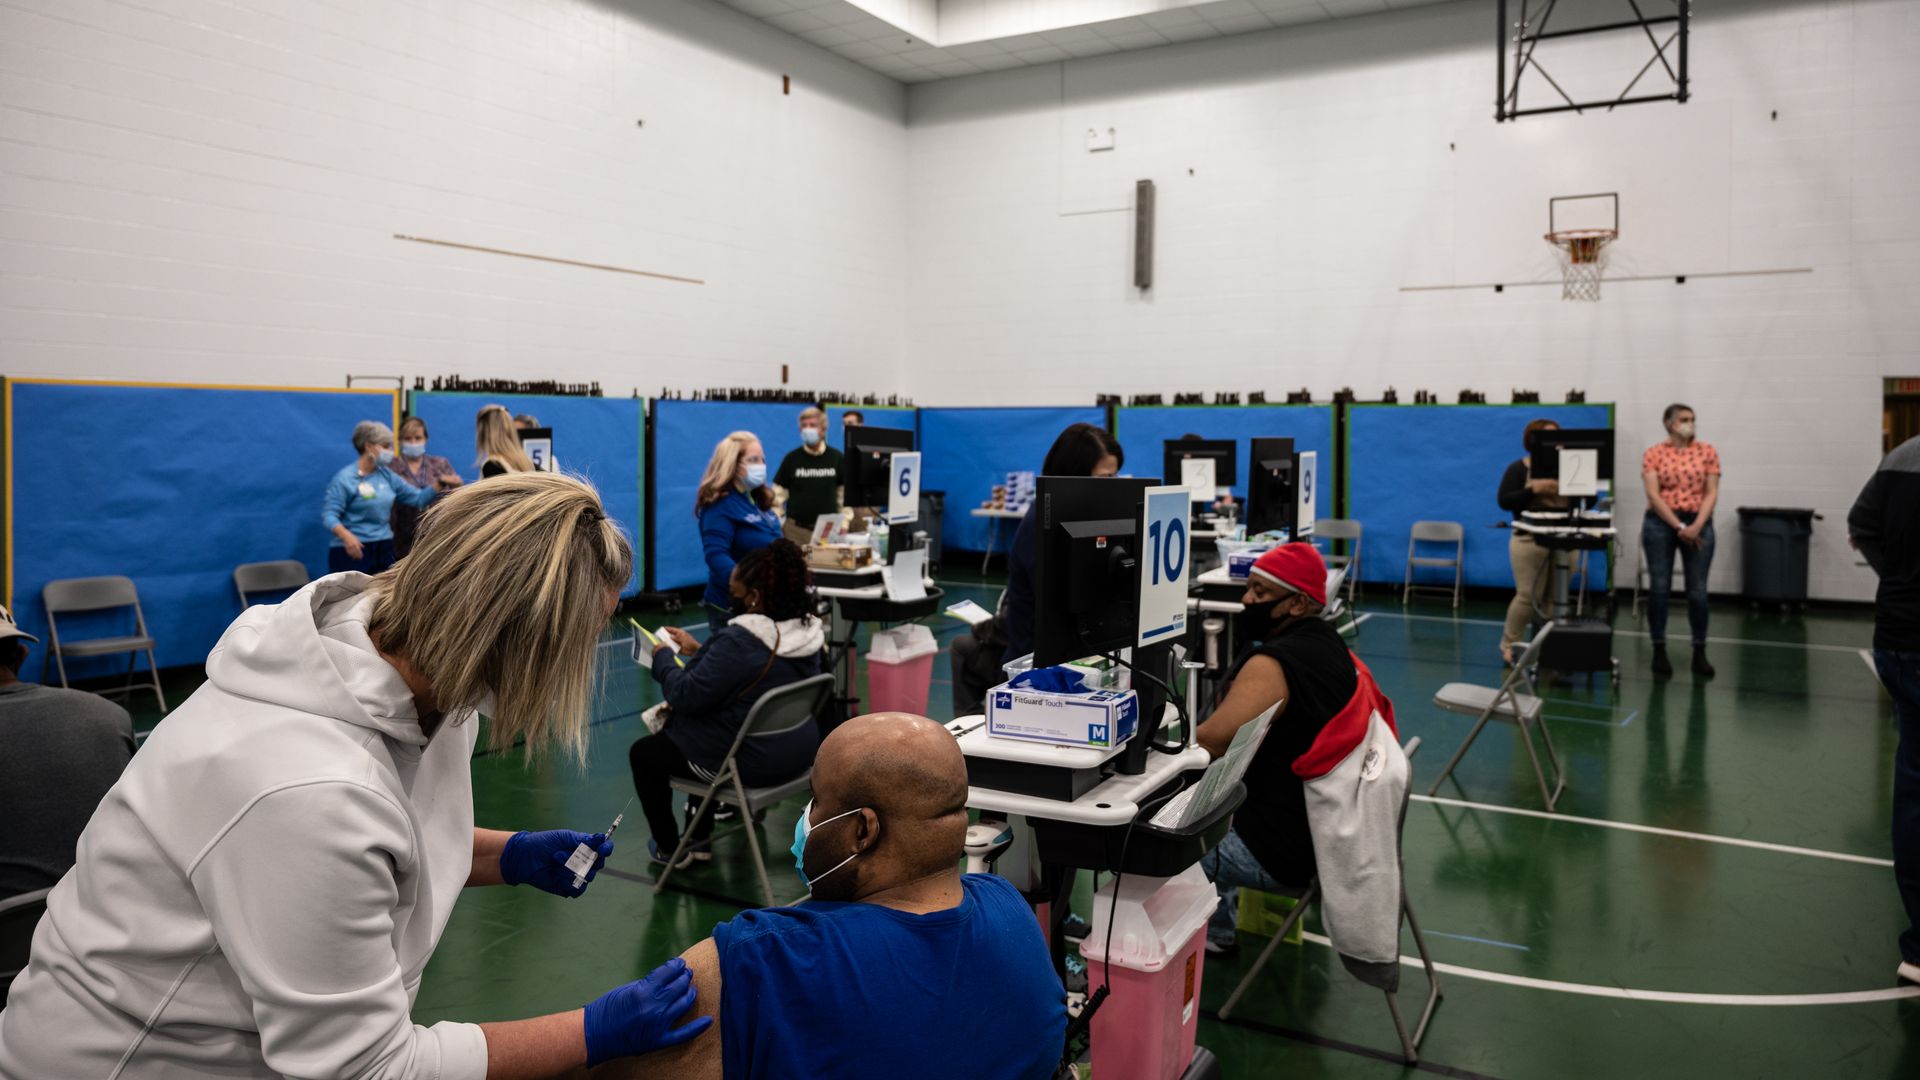 A man receives his COVID-19 vaccine from a nurse in the gymnasium at Whitney M. Young Elementary School on April 2, 2021 in Louisville, Kentucky